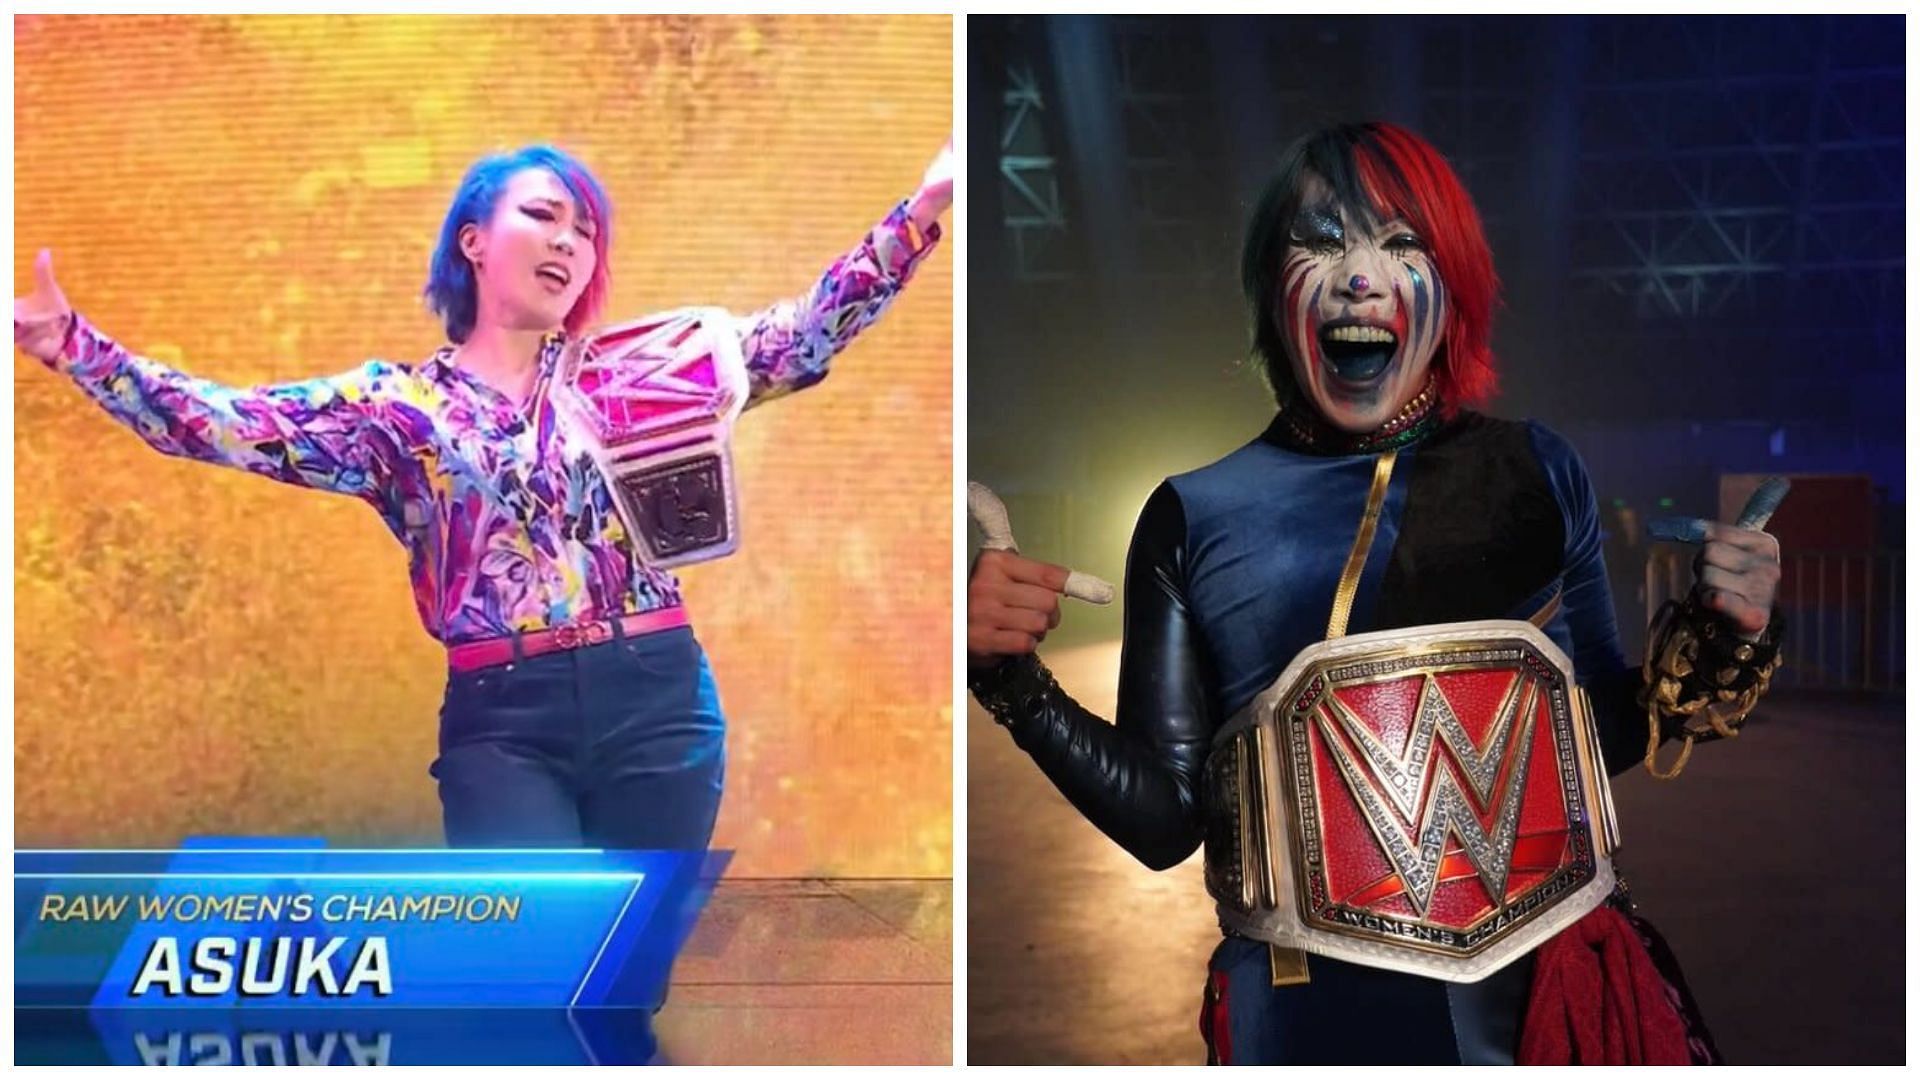 Asuka is the current WWE RAW Women